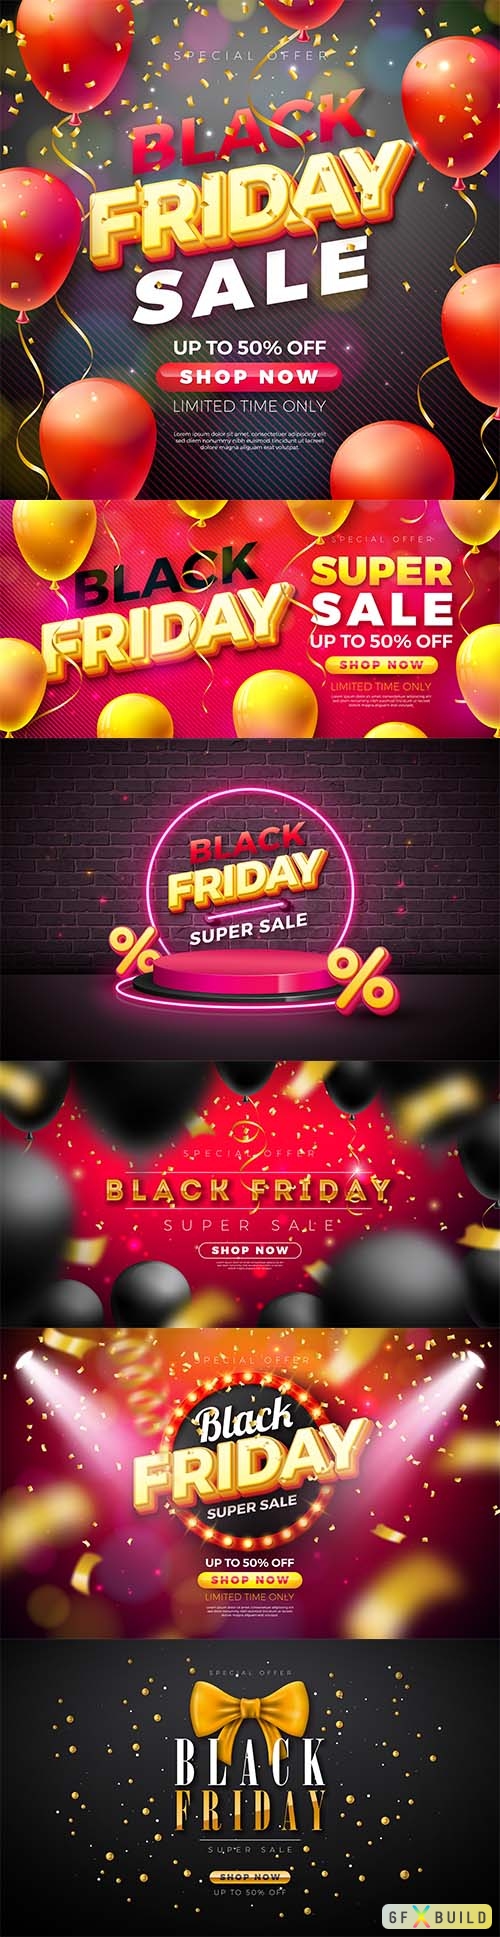 Black friday super sale illustration with magic gold text lettering